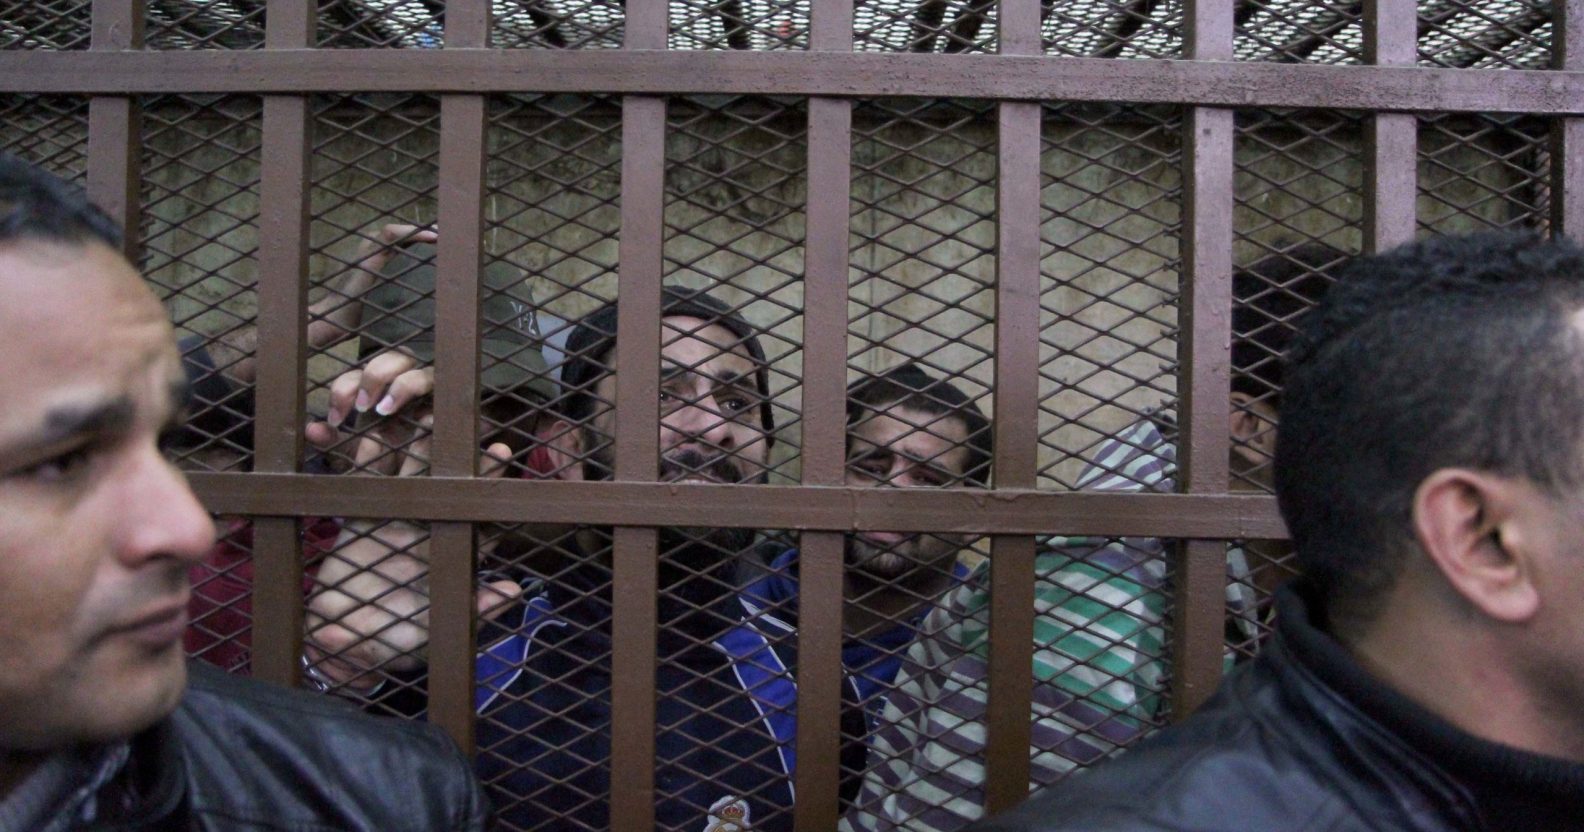 Egypt: Police are using Grindr to hunt, imprison and torture LGBT people